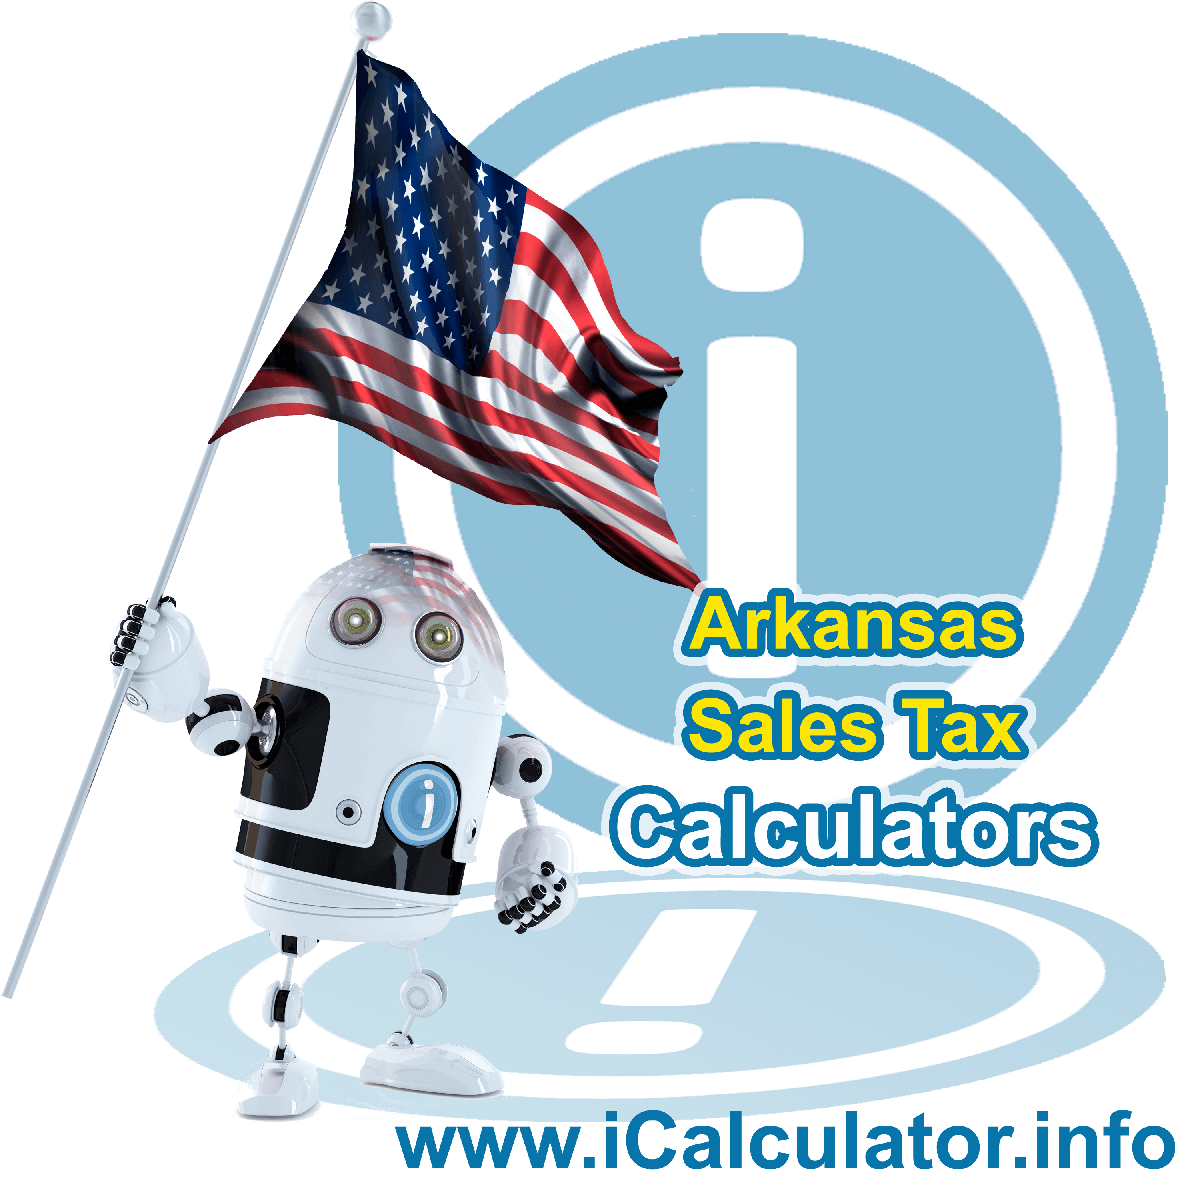 Fordyce Sales Rates: This image illustrates a calculator robot calculating Fordyce sales tax manually using the Fordyce Sales Tax Formula. You can use this information to calculate Fordyce Sales Tax manually or use the Fordyce Sales Tax Calculator to calculate sales tax online.